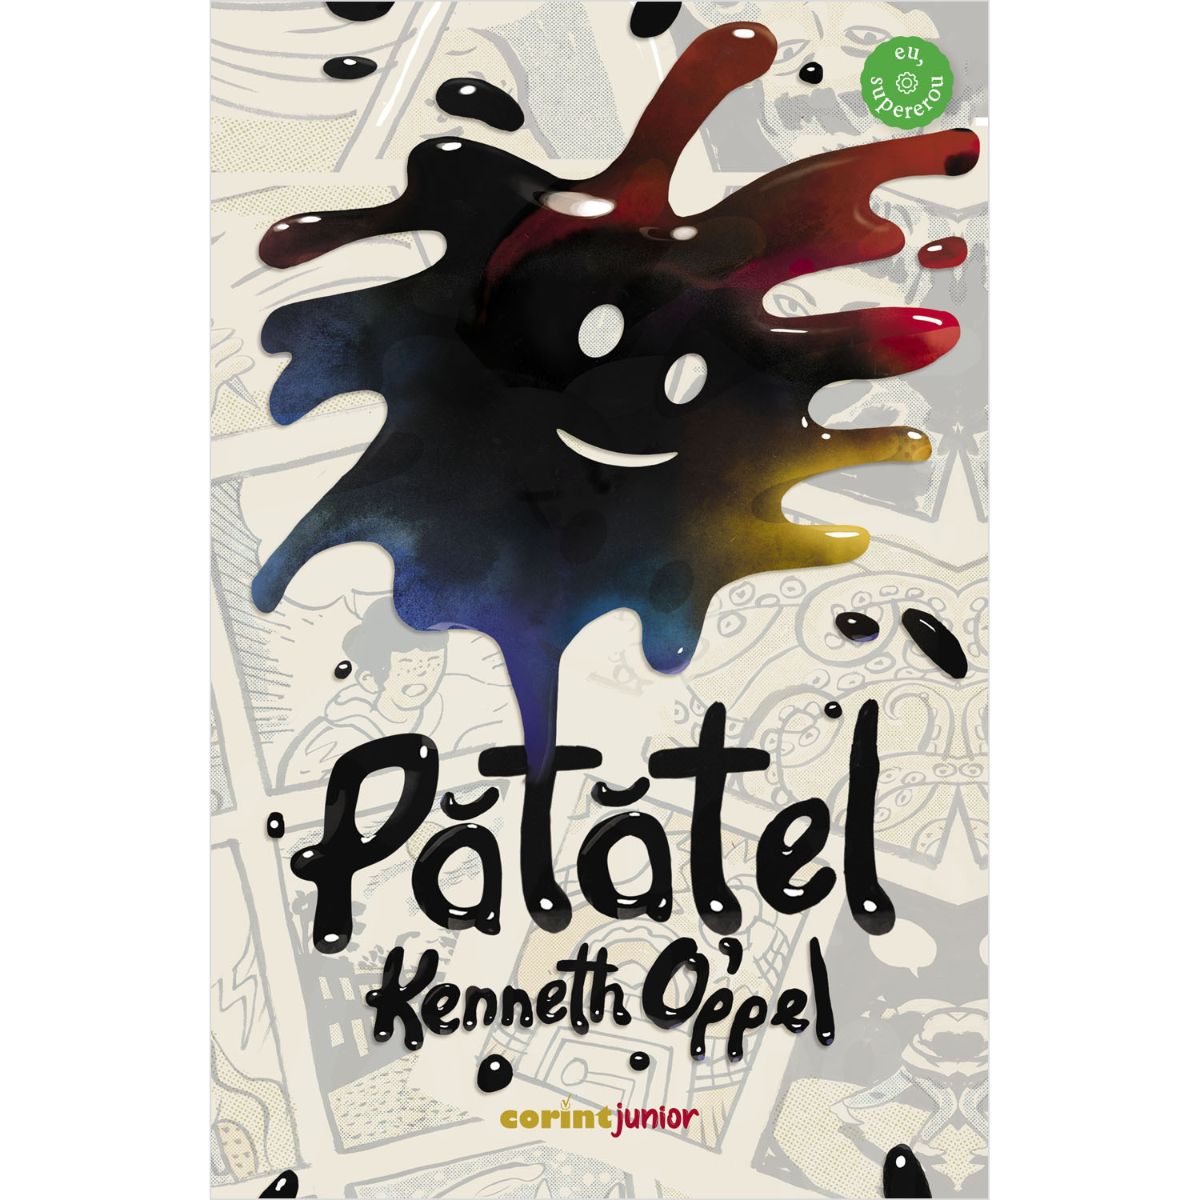 Patatel, Kenneth Oppel